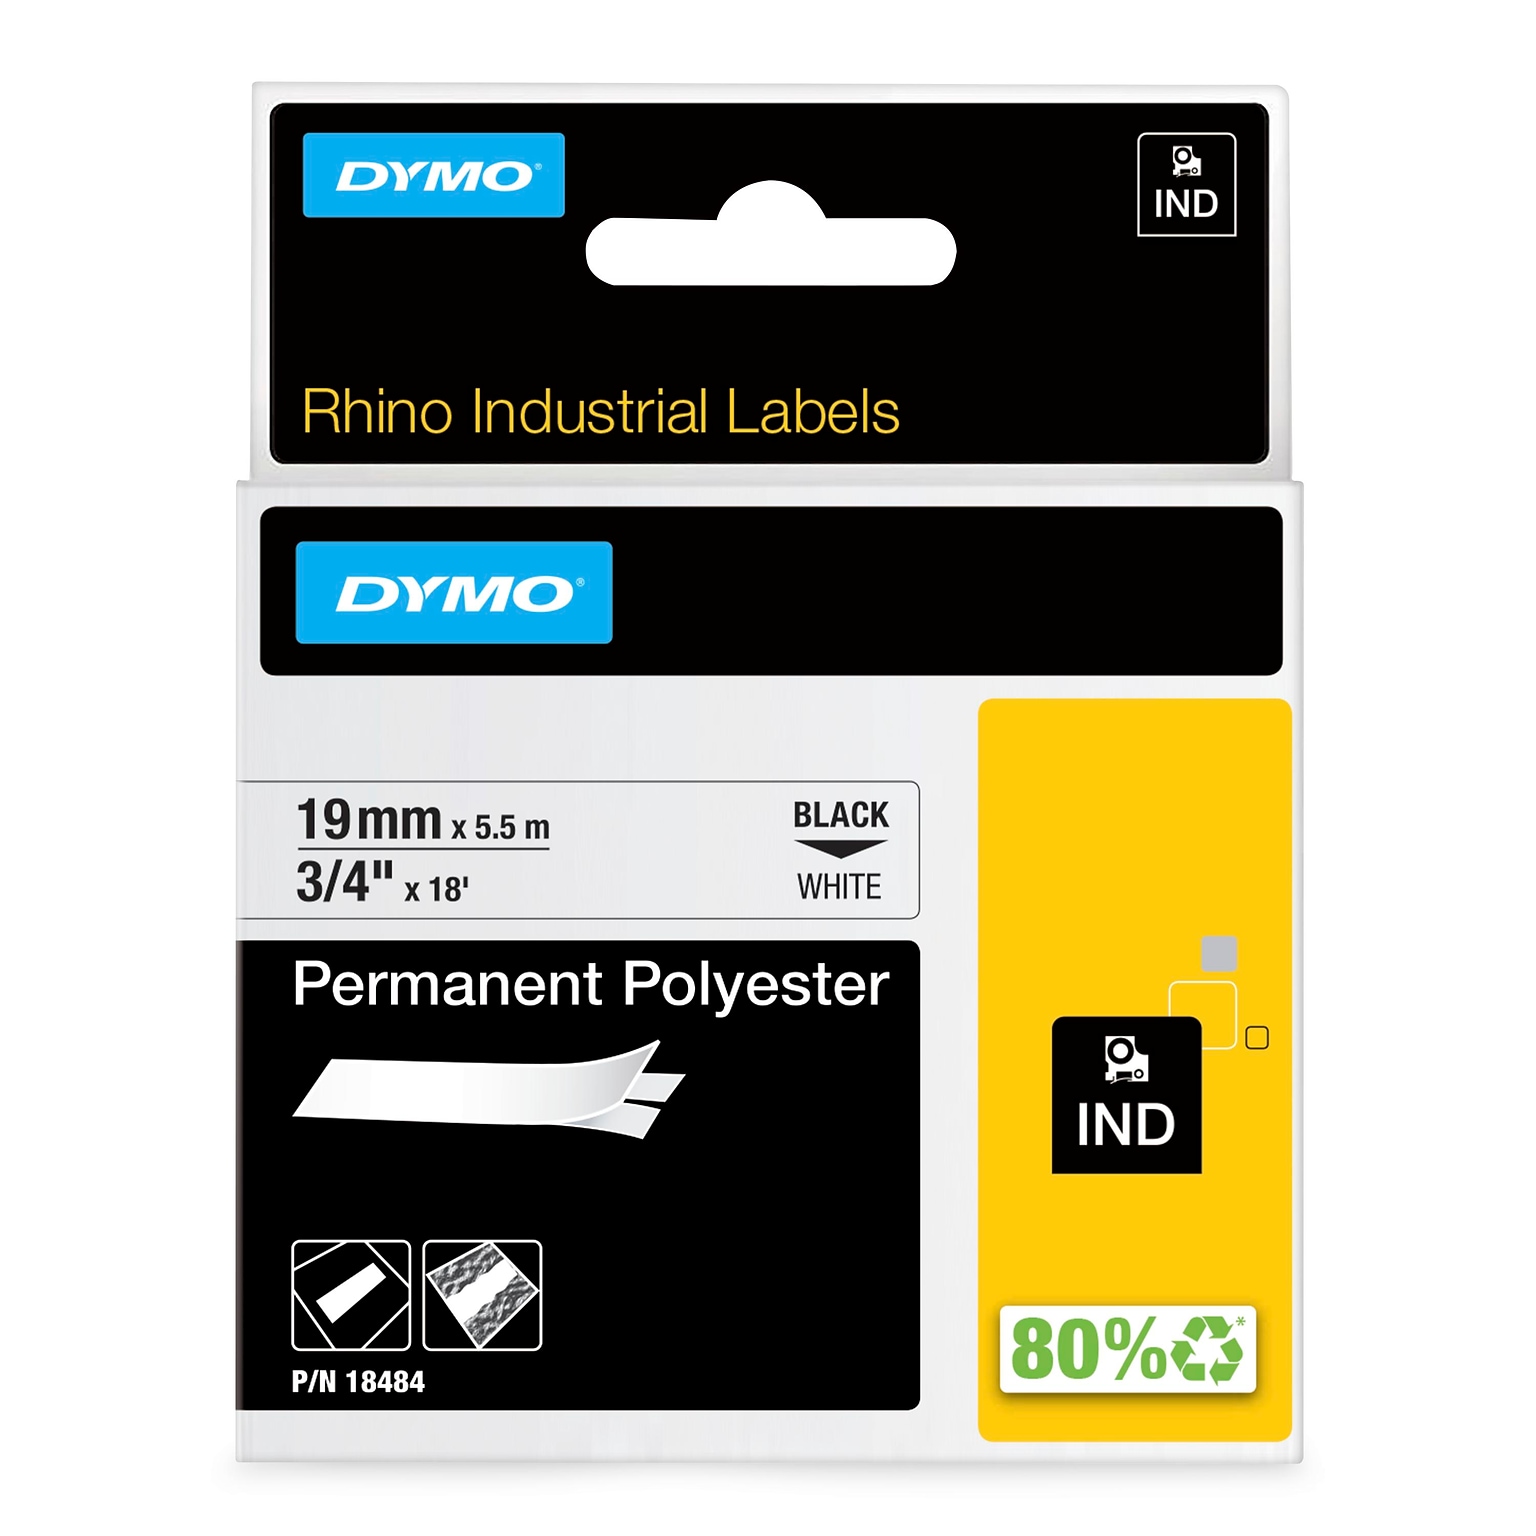 DYMO Rhino Industrial 18484 Permanent Polyester Label Maker Tape, 3/4 x 18, Black on White (18484)